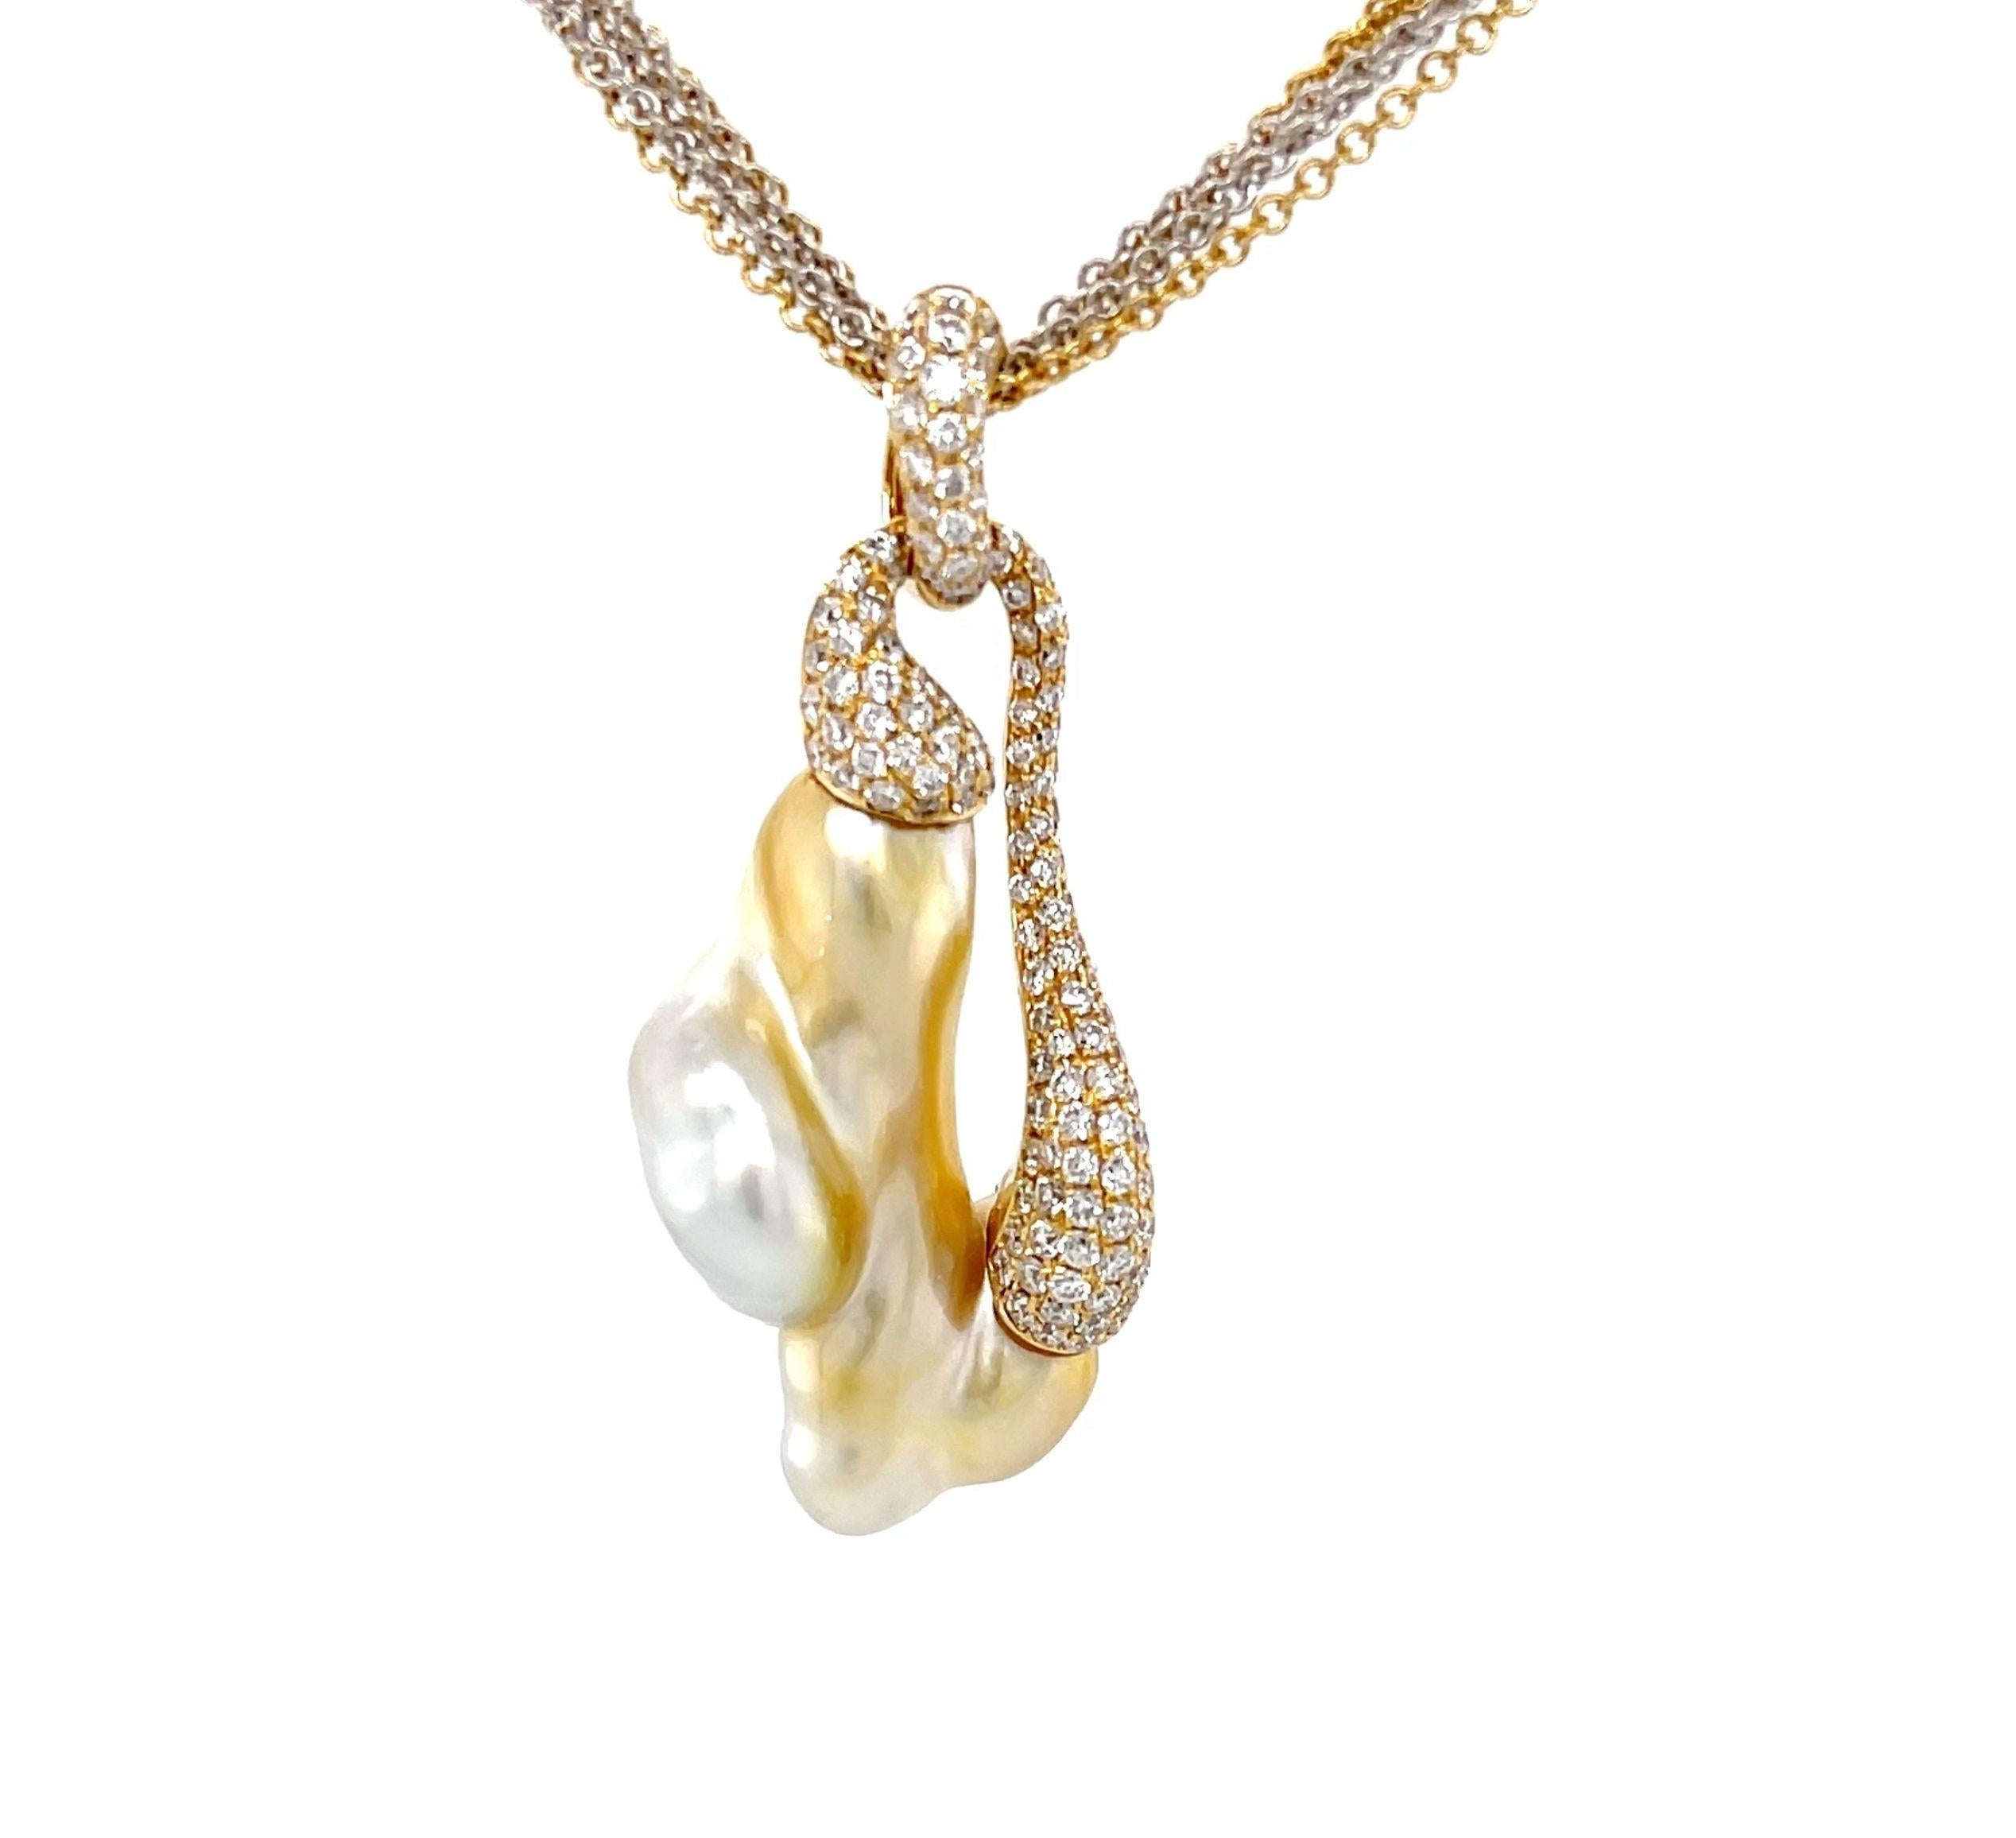 This exquisite necklace features a large, natural gold keshi pearl with  breathtaking color and luster! A natural gold pearl is both rare and valuable, particularly one as fine as this gem! The flowing design complements the lovely shape of this